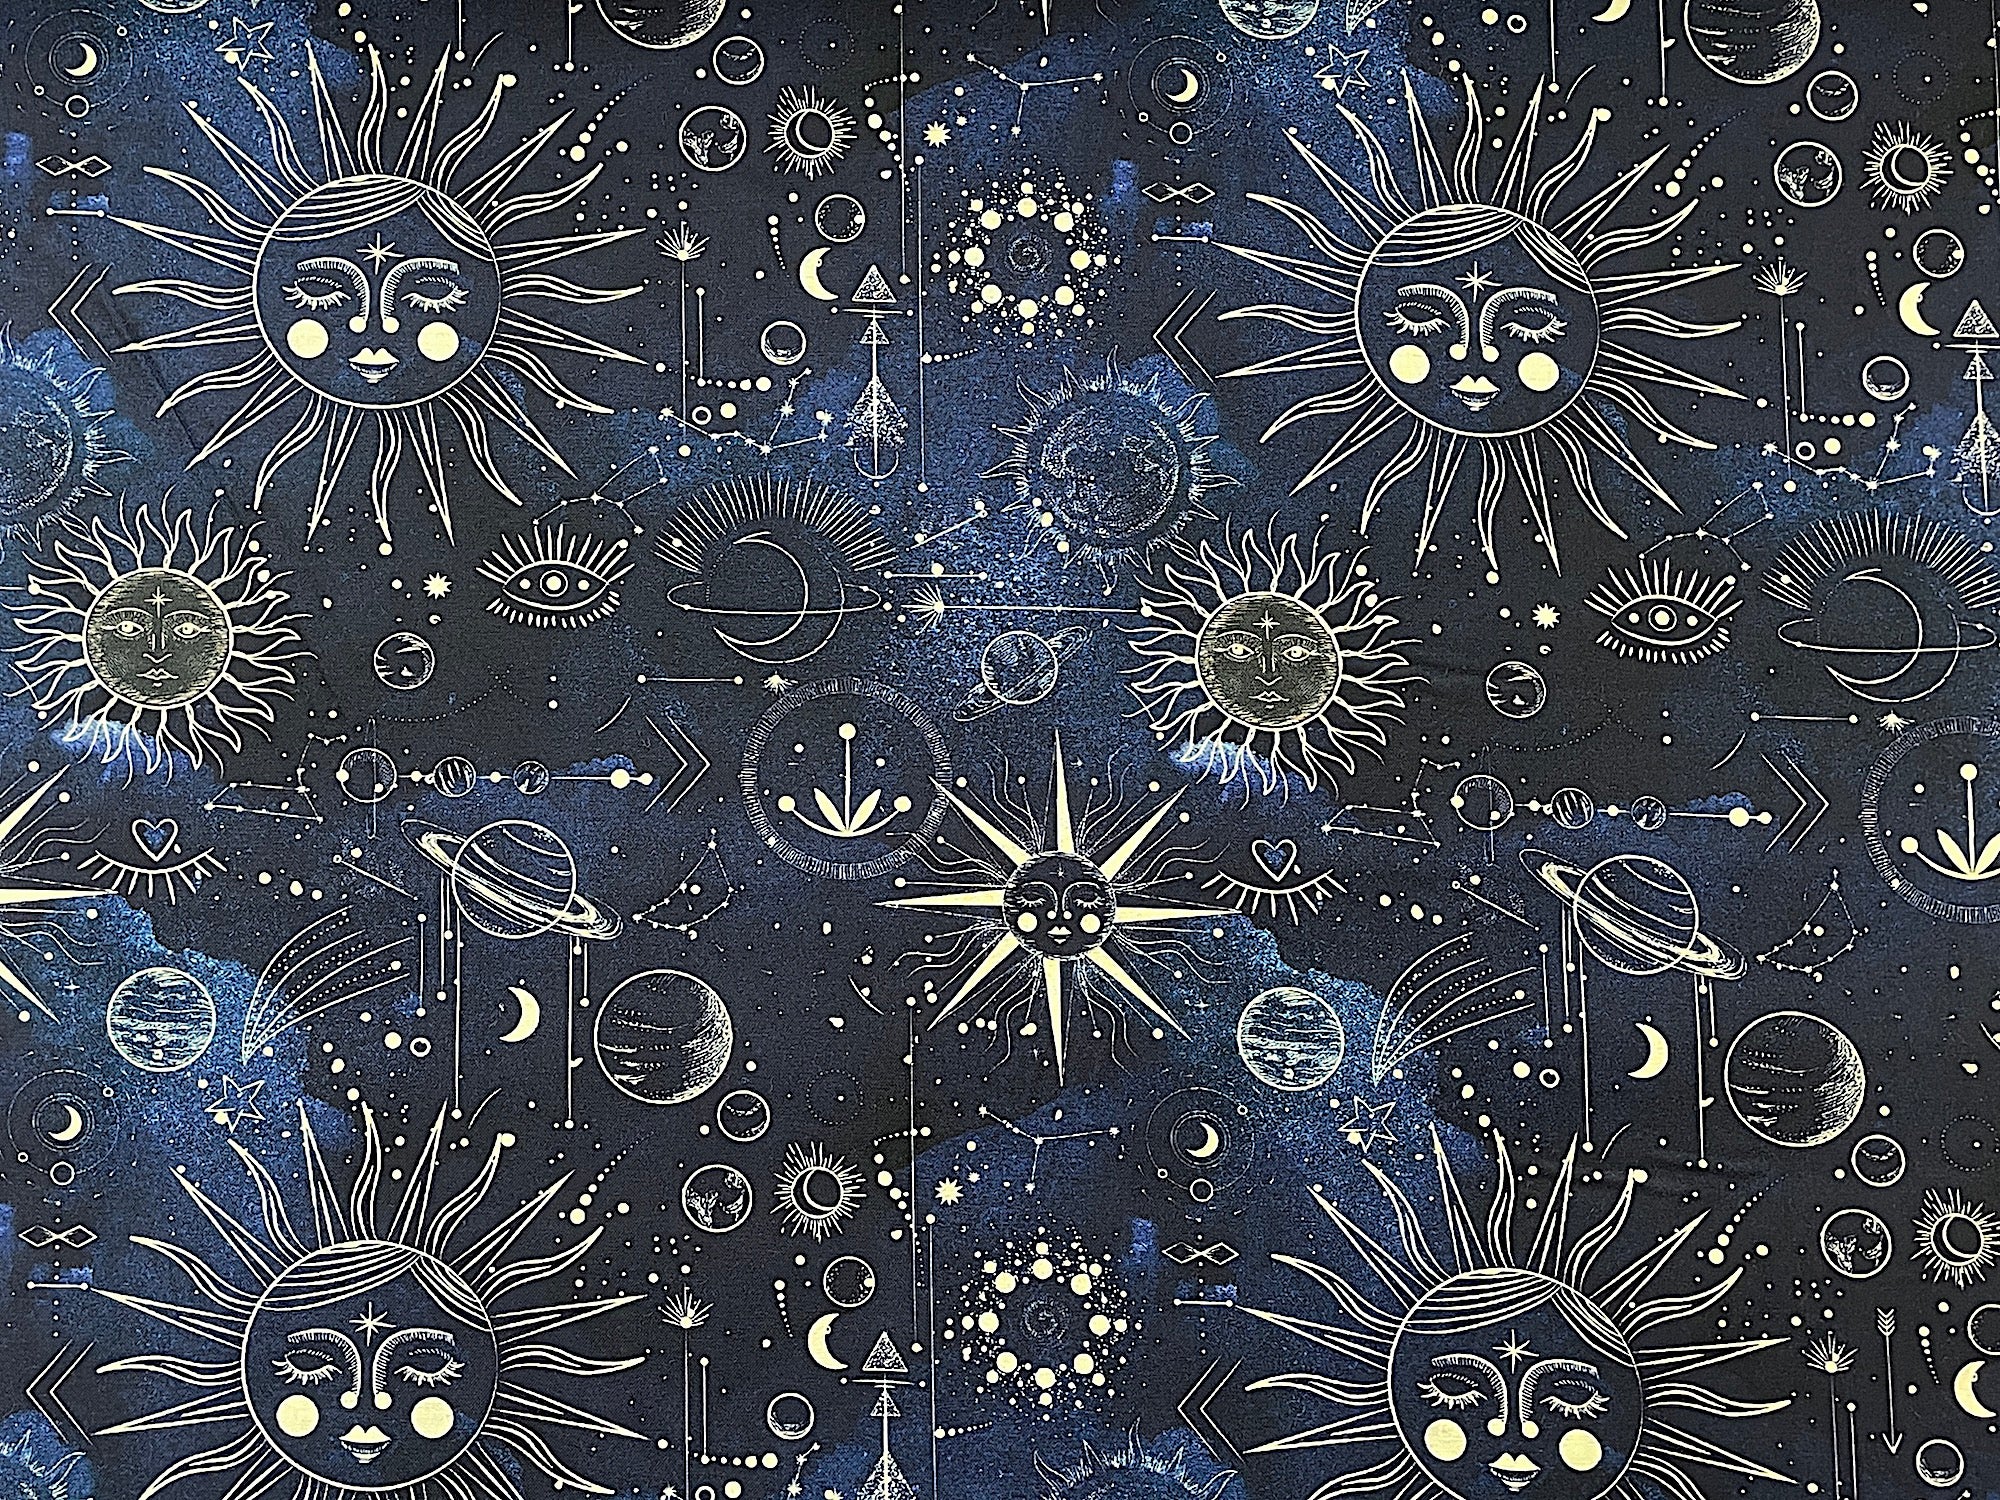 This dark blue cotton fabric is covered with the sun, moon, planets and more.